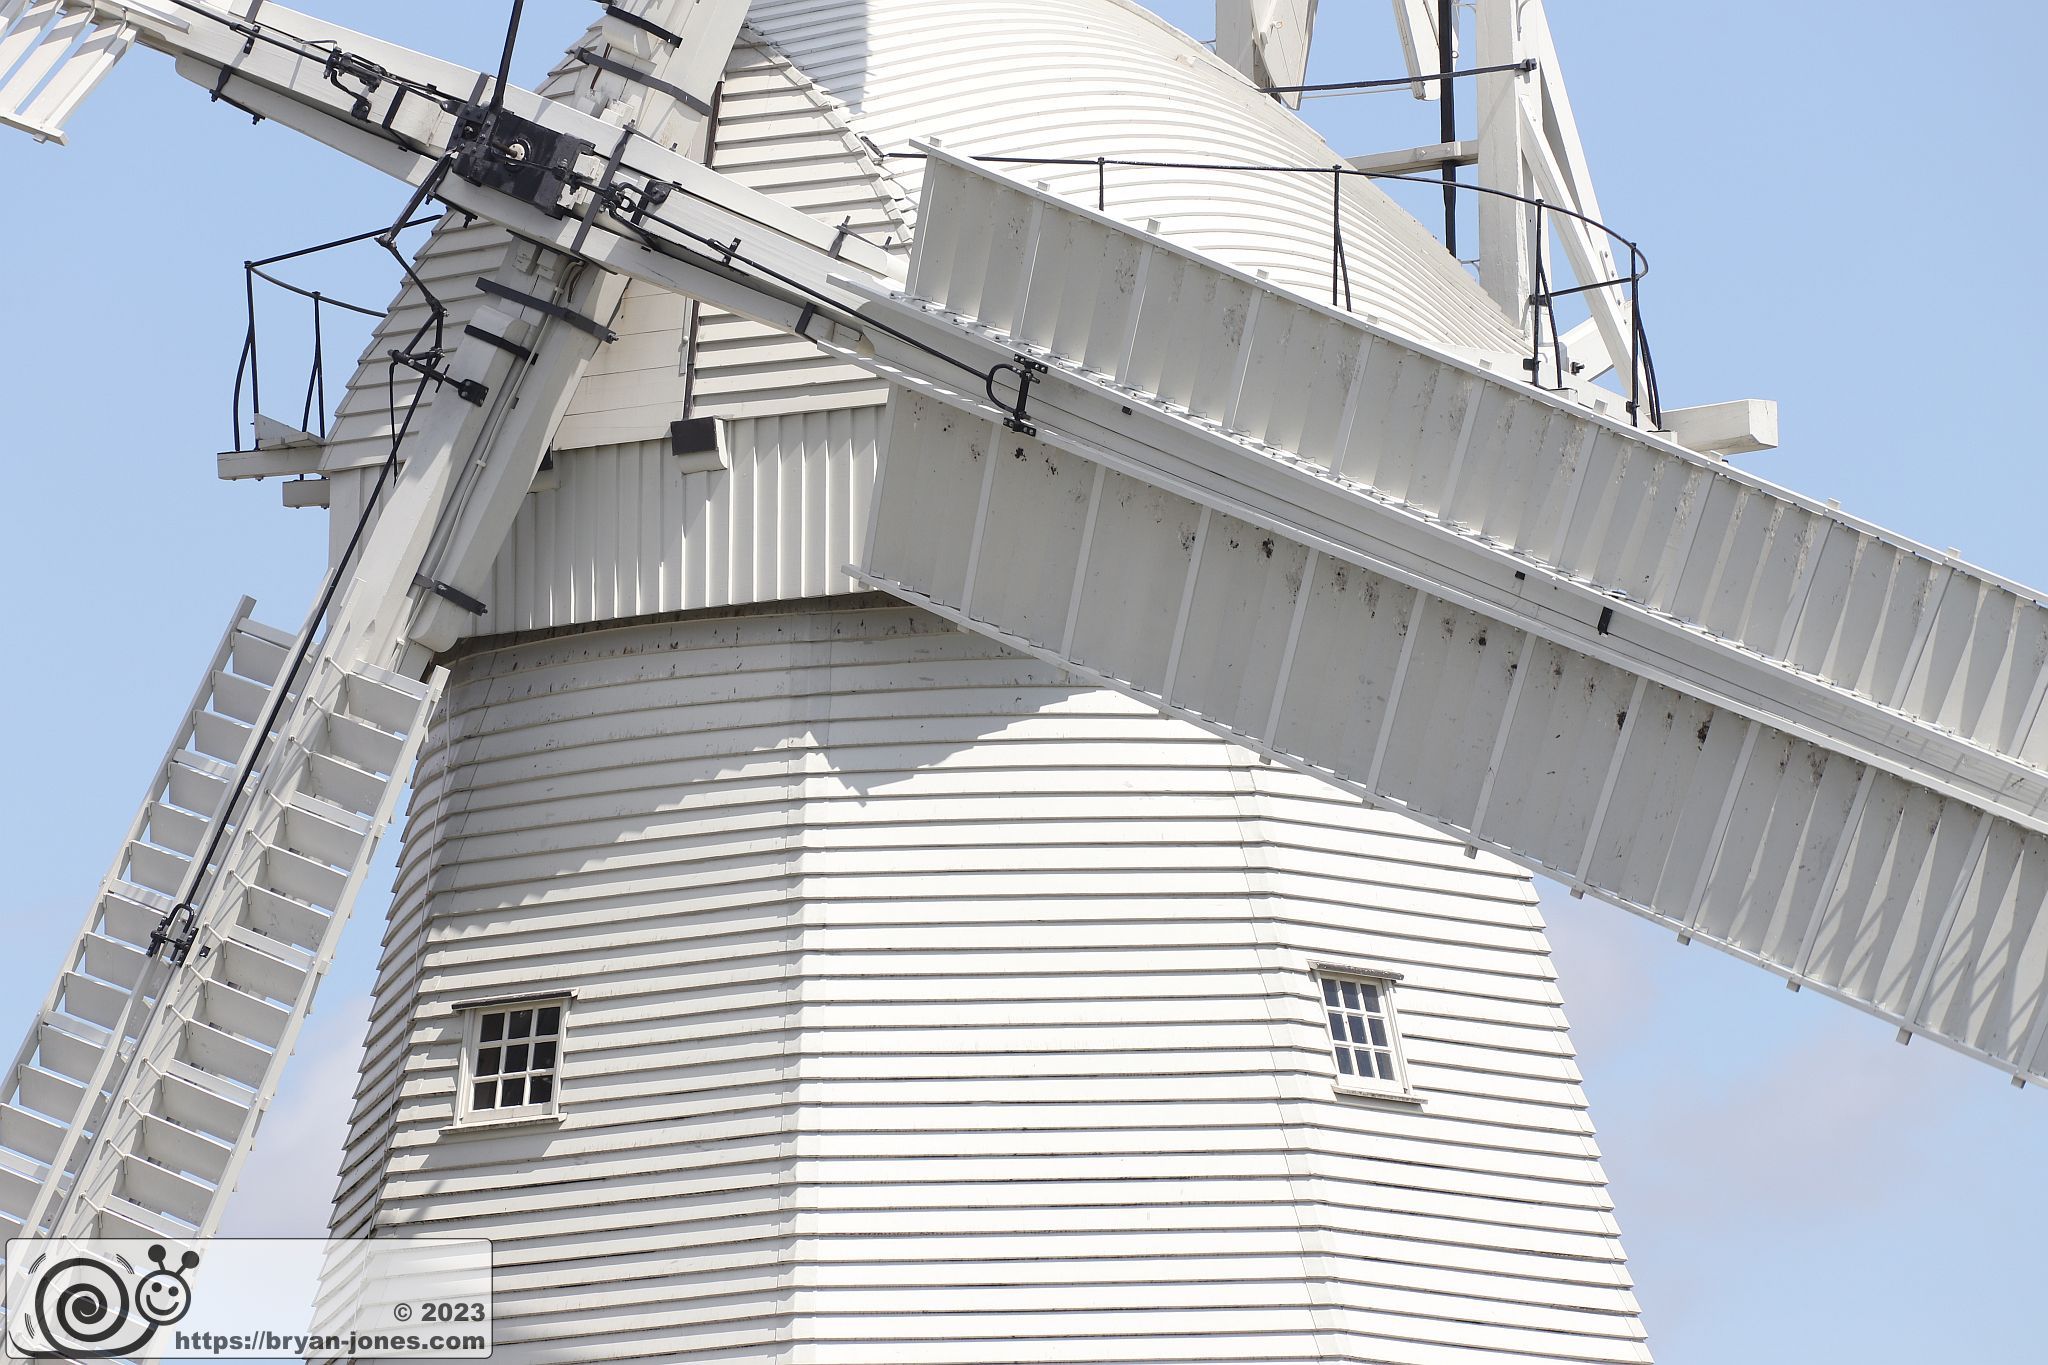 Upminster Windmill to the East of London. Photo 29-Jul-2023.